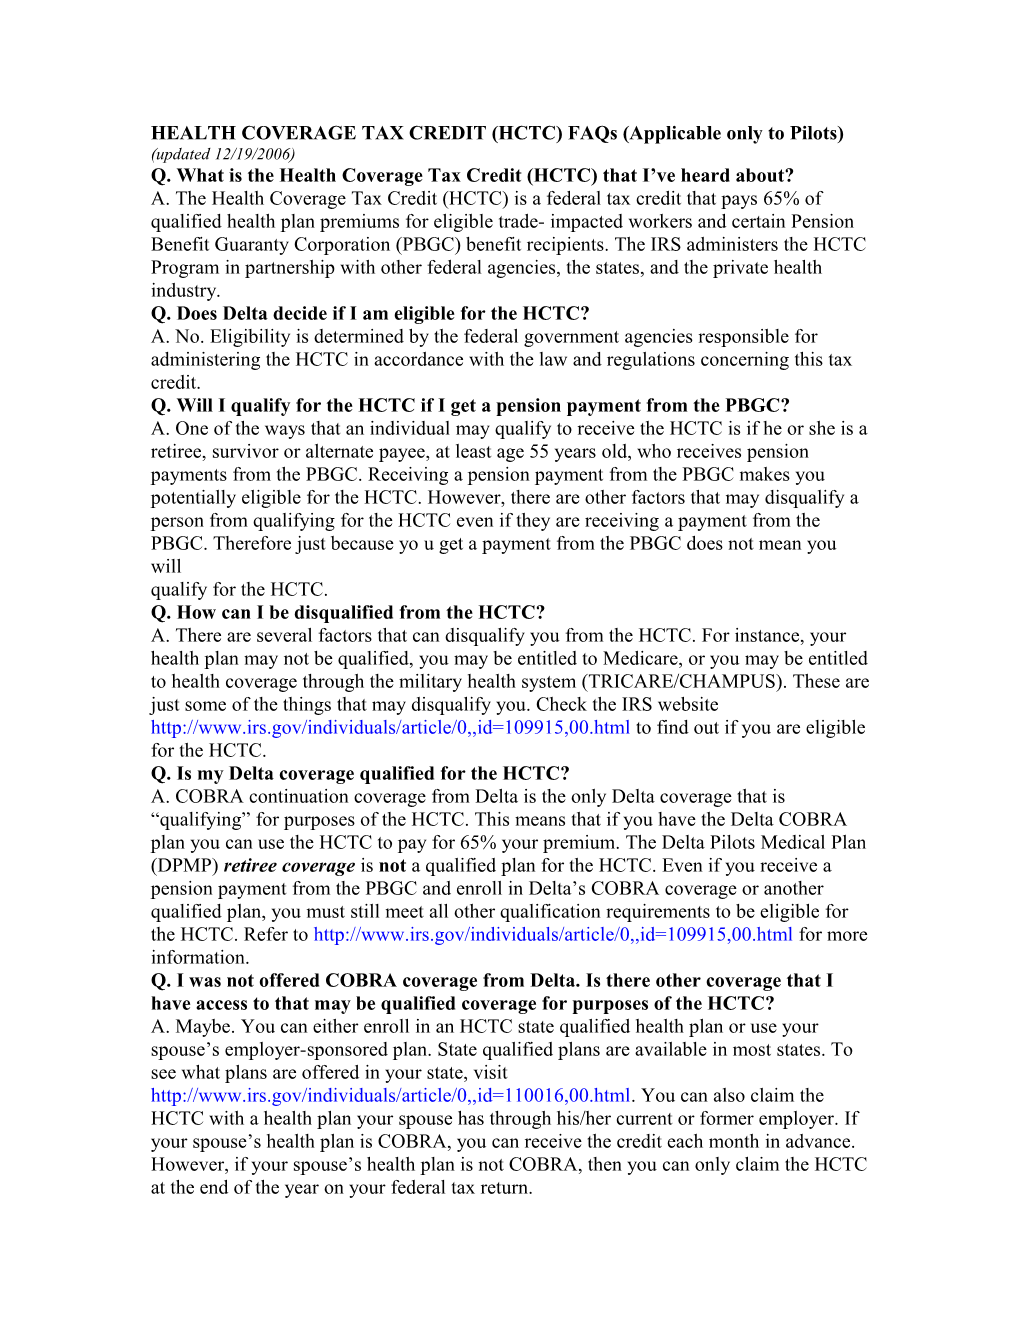 HEALTH COVERAGE TAX CREDIT (HCTC) Faqs (Applicable Only to Pilots)